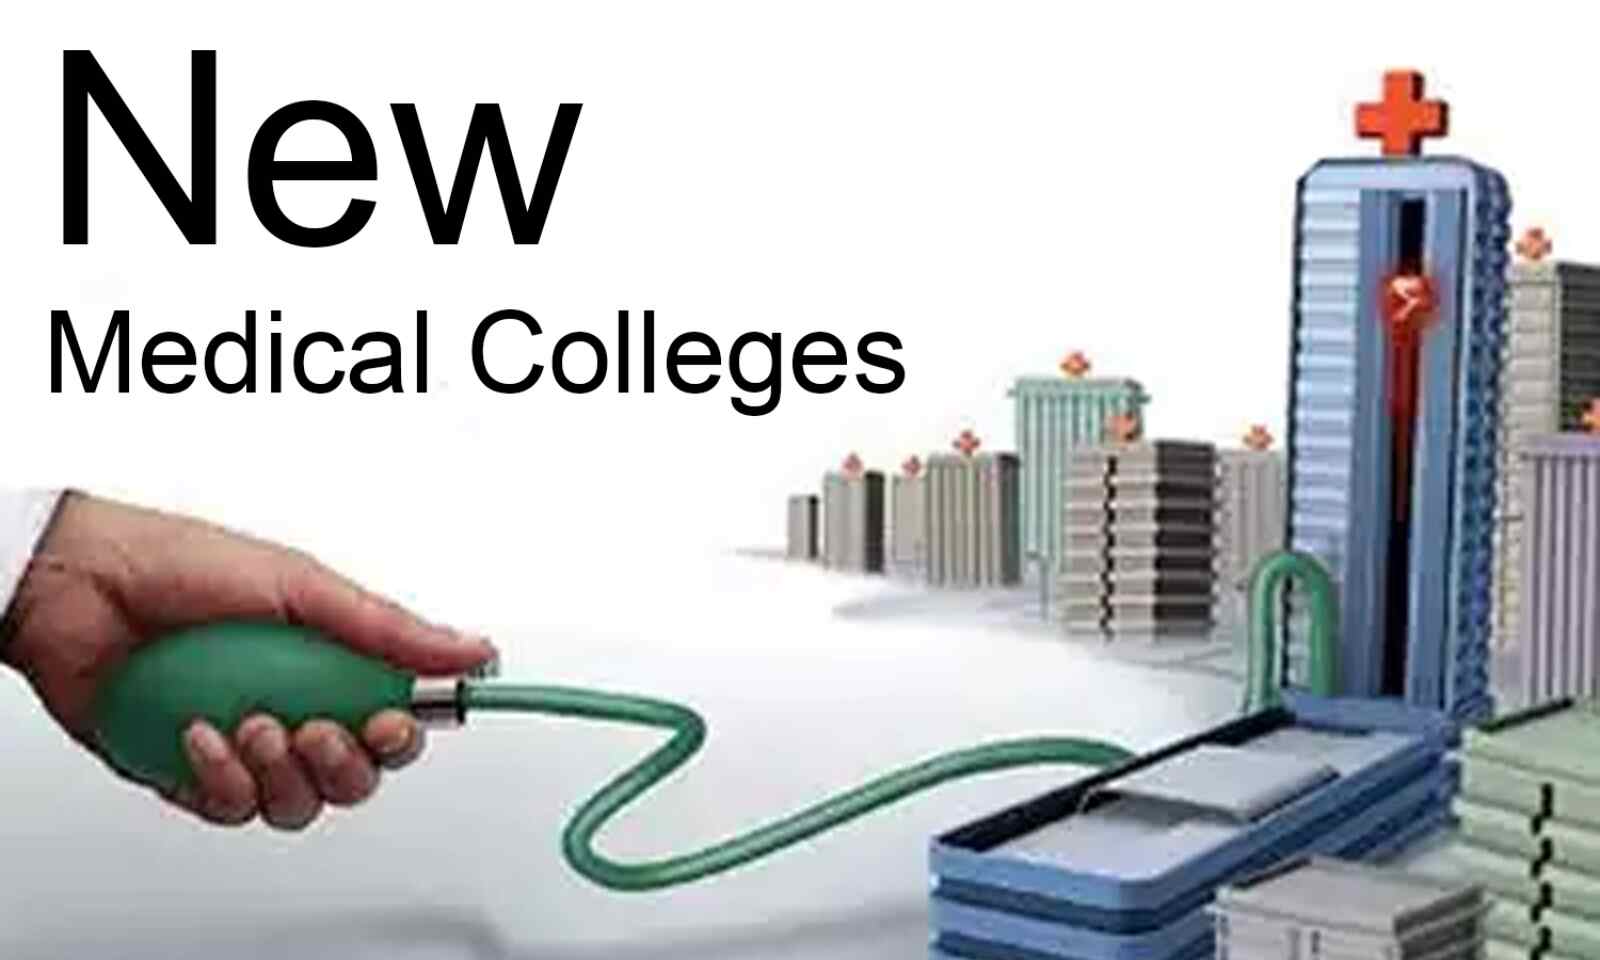 NEW MEDICAL COLLEGE